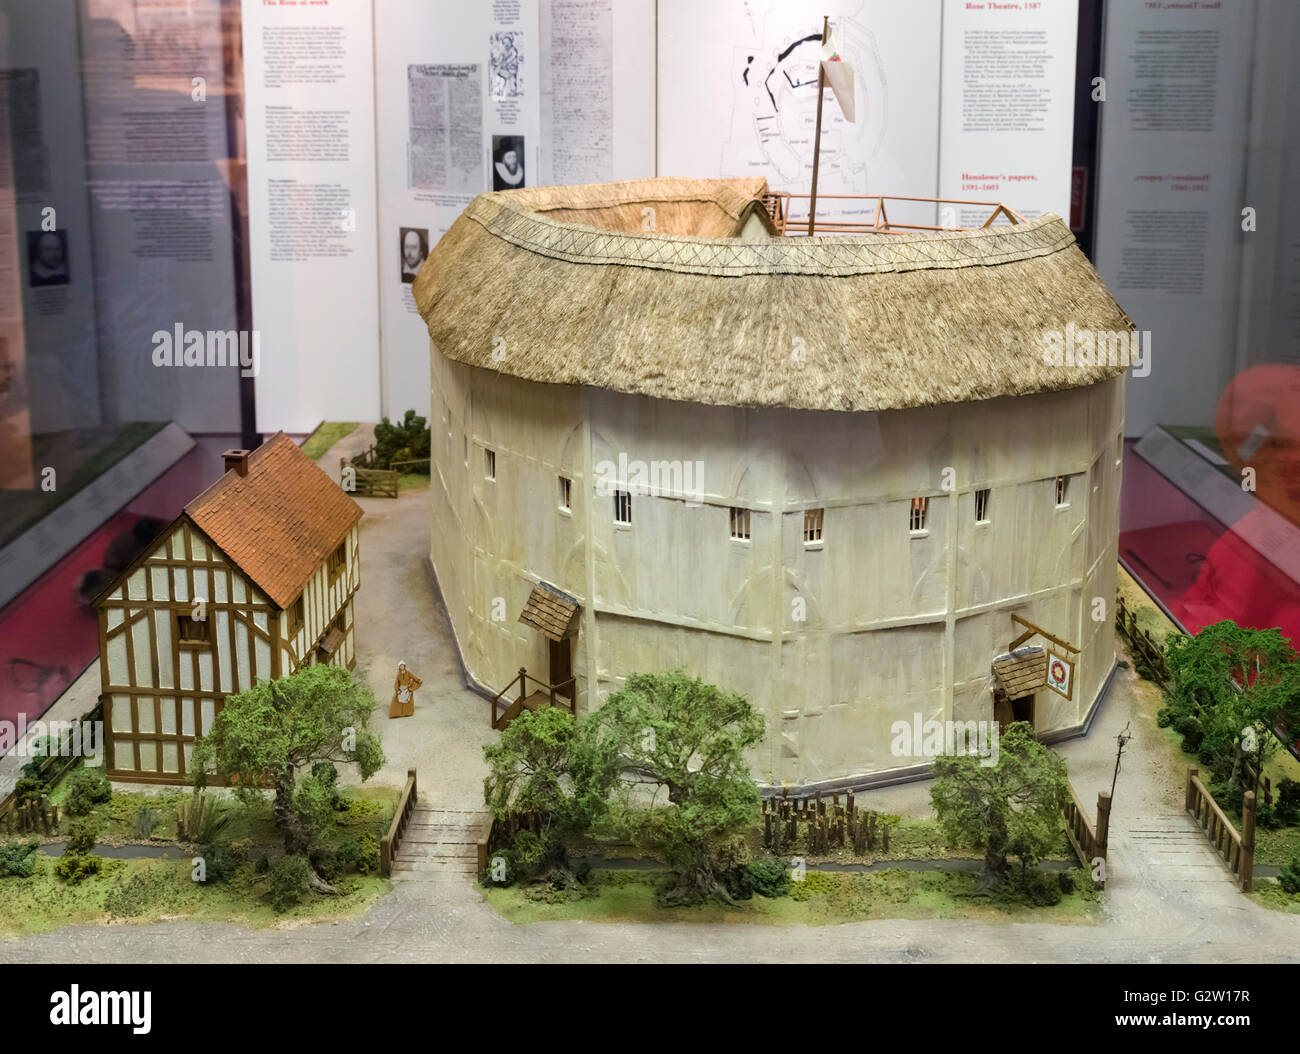 Model showing the old Rose Theatre, displayed in the Museum of London,  London, England, UK. The Rose was built in 1587 and was the first  purpose-built playhouse to stage a production of